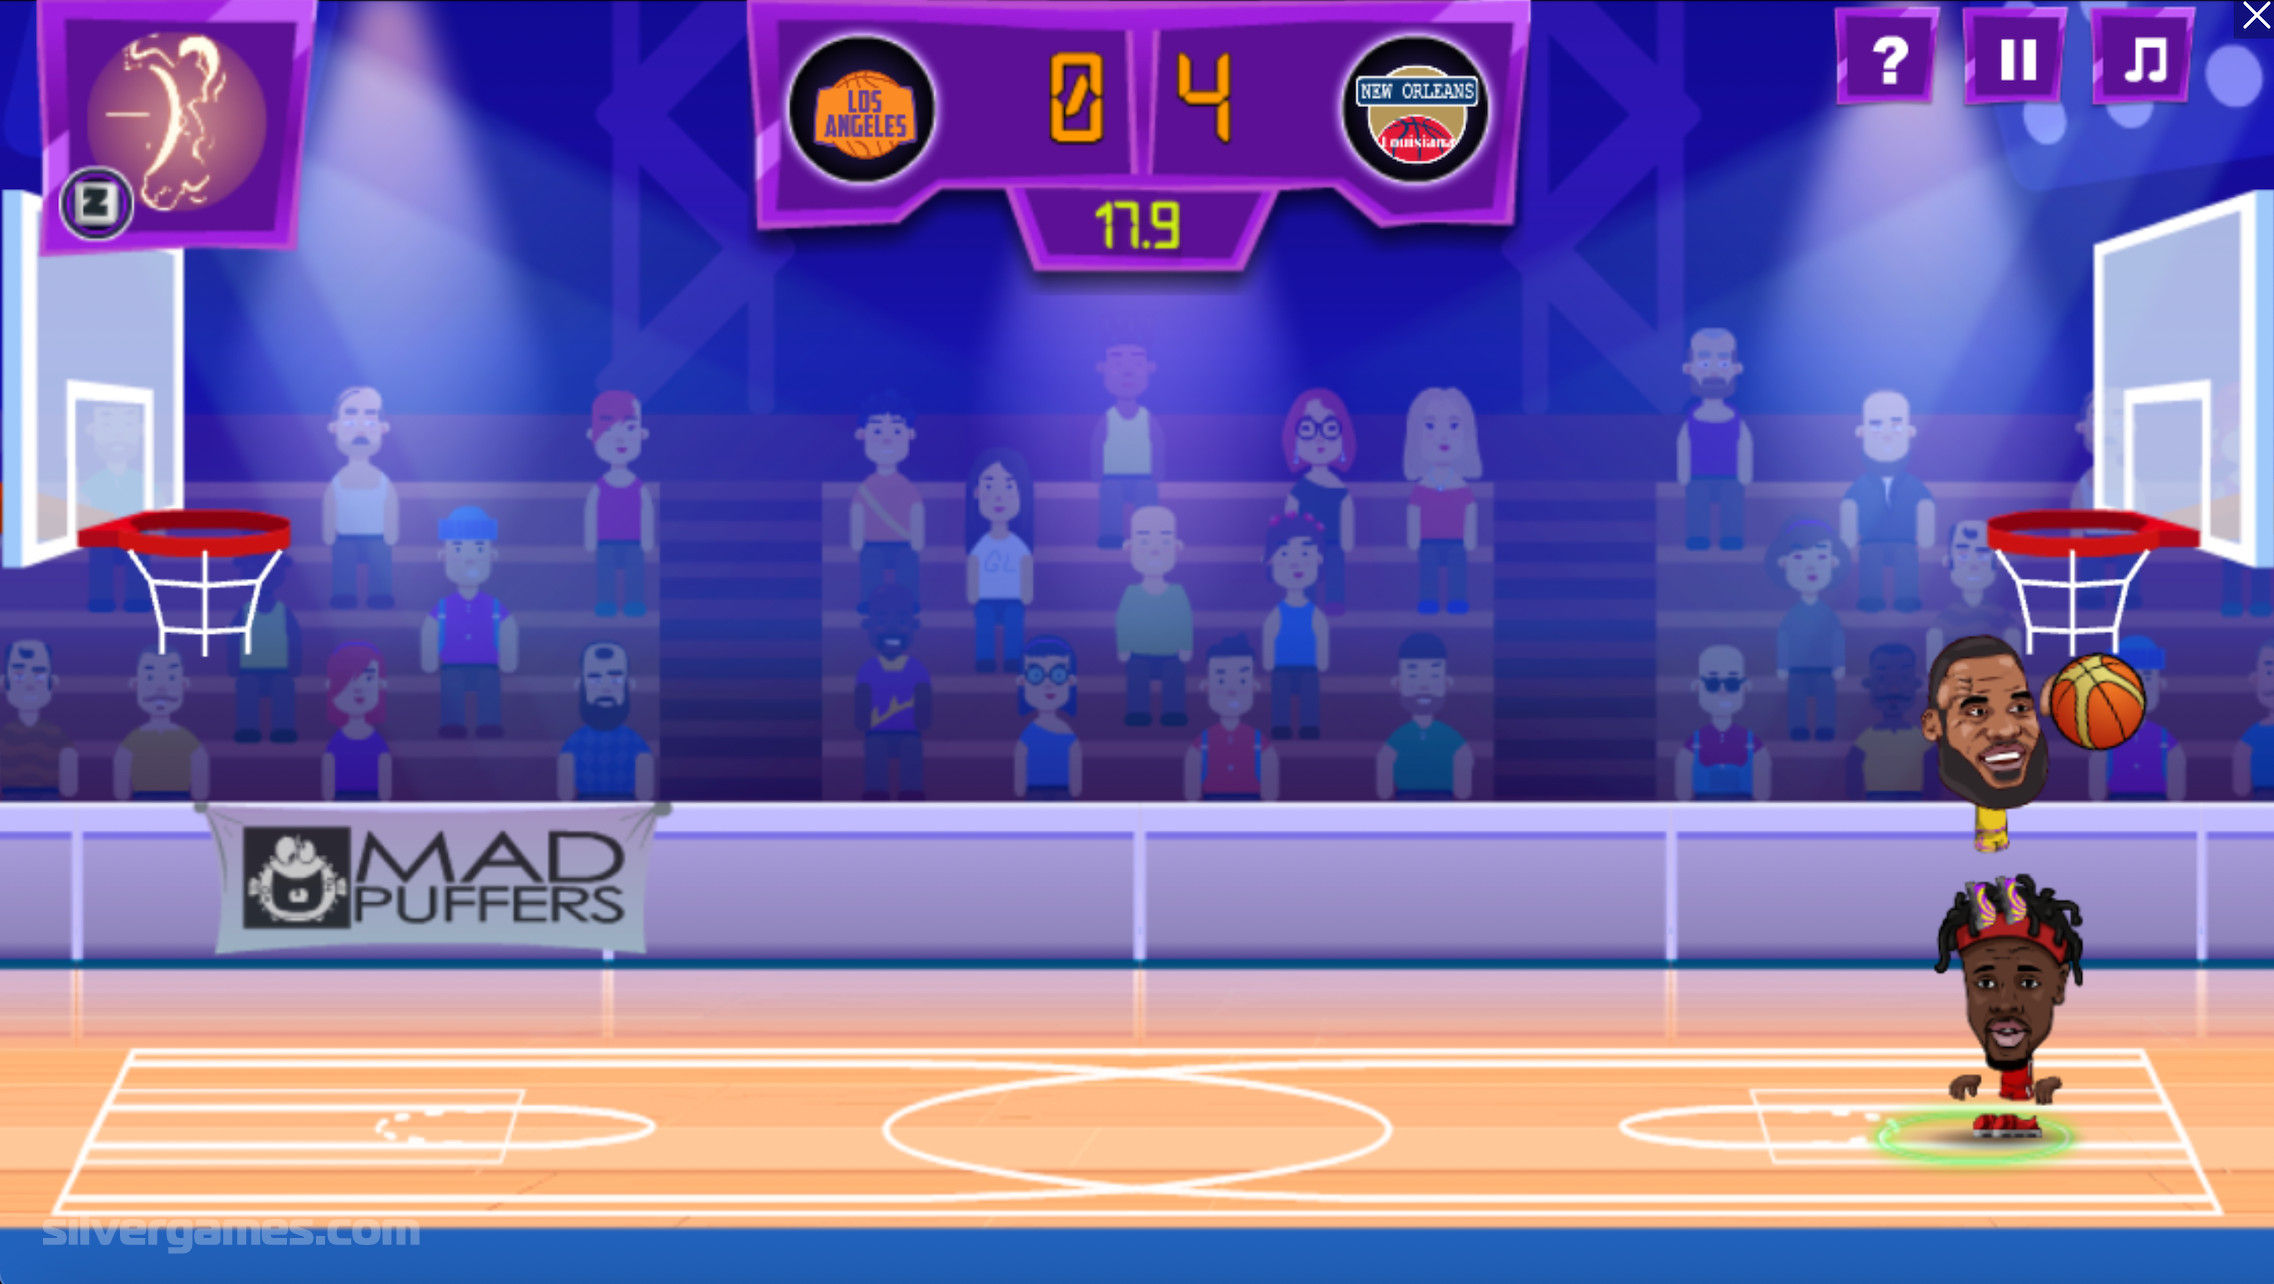 Basket Swooshes - Play Online on SilverGames 🕹️